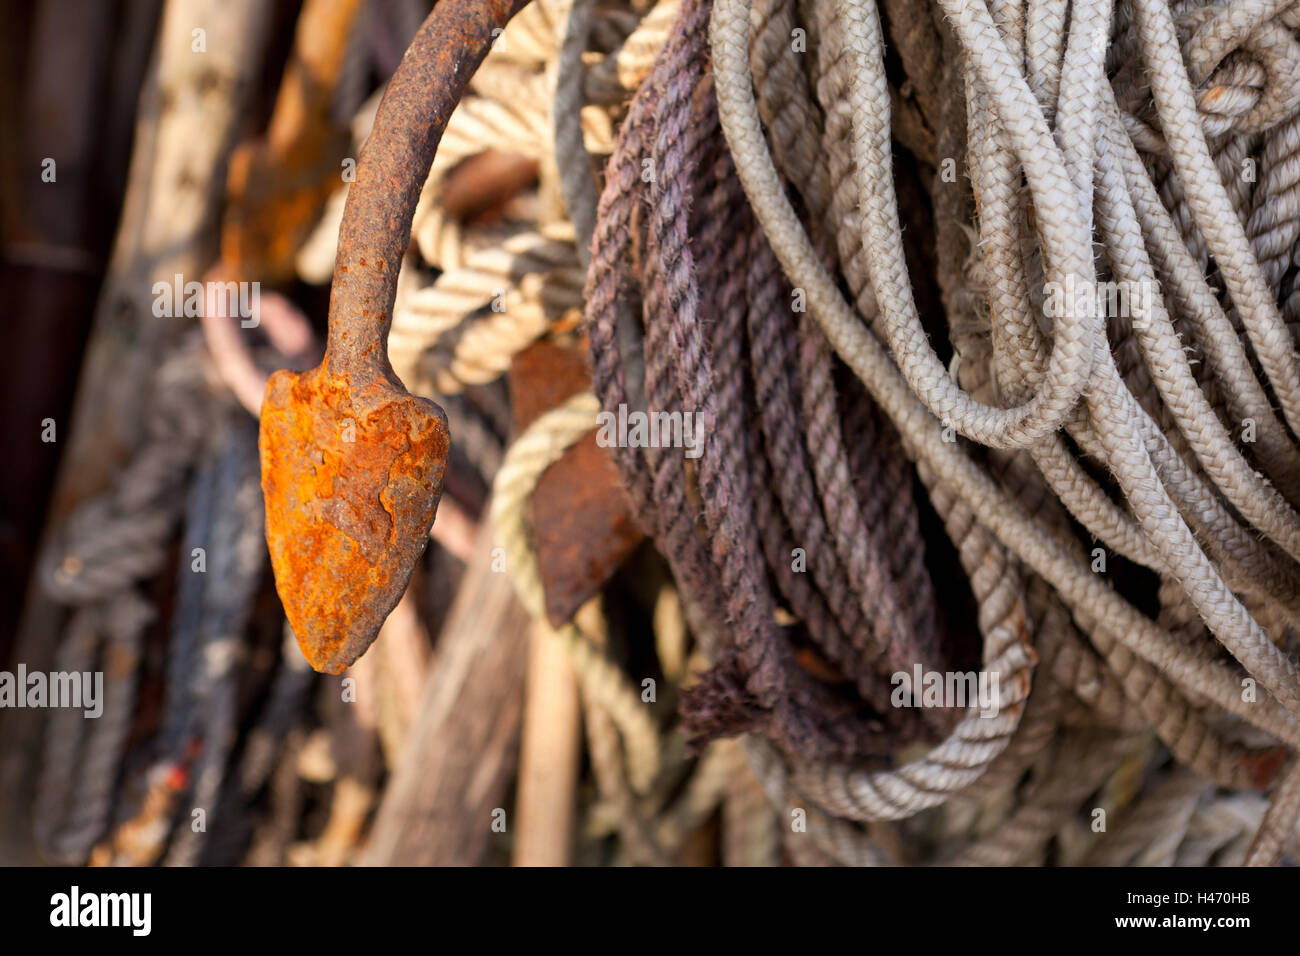 The Baltic Sea, fishing, ropes and hooks, Stock Photo